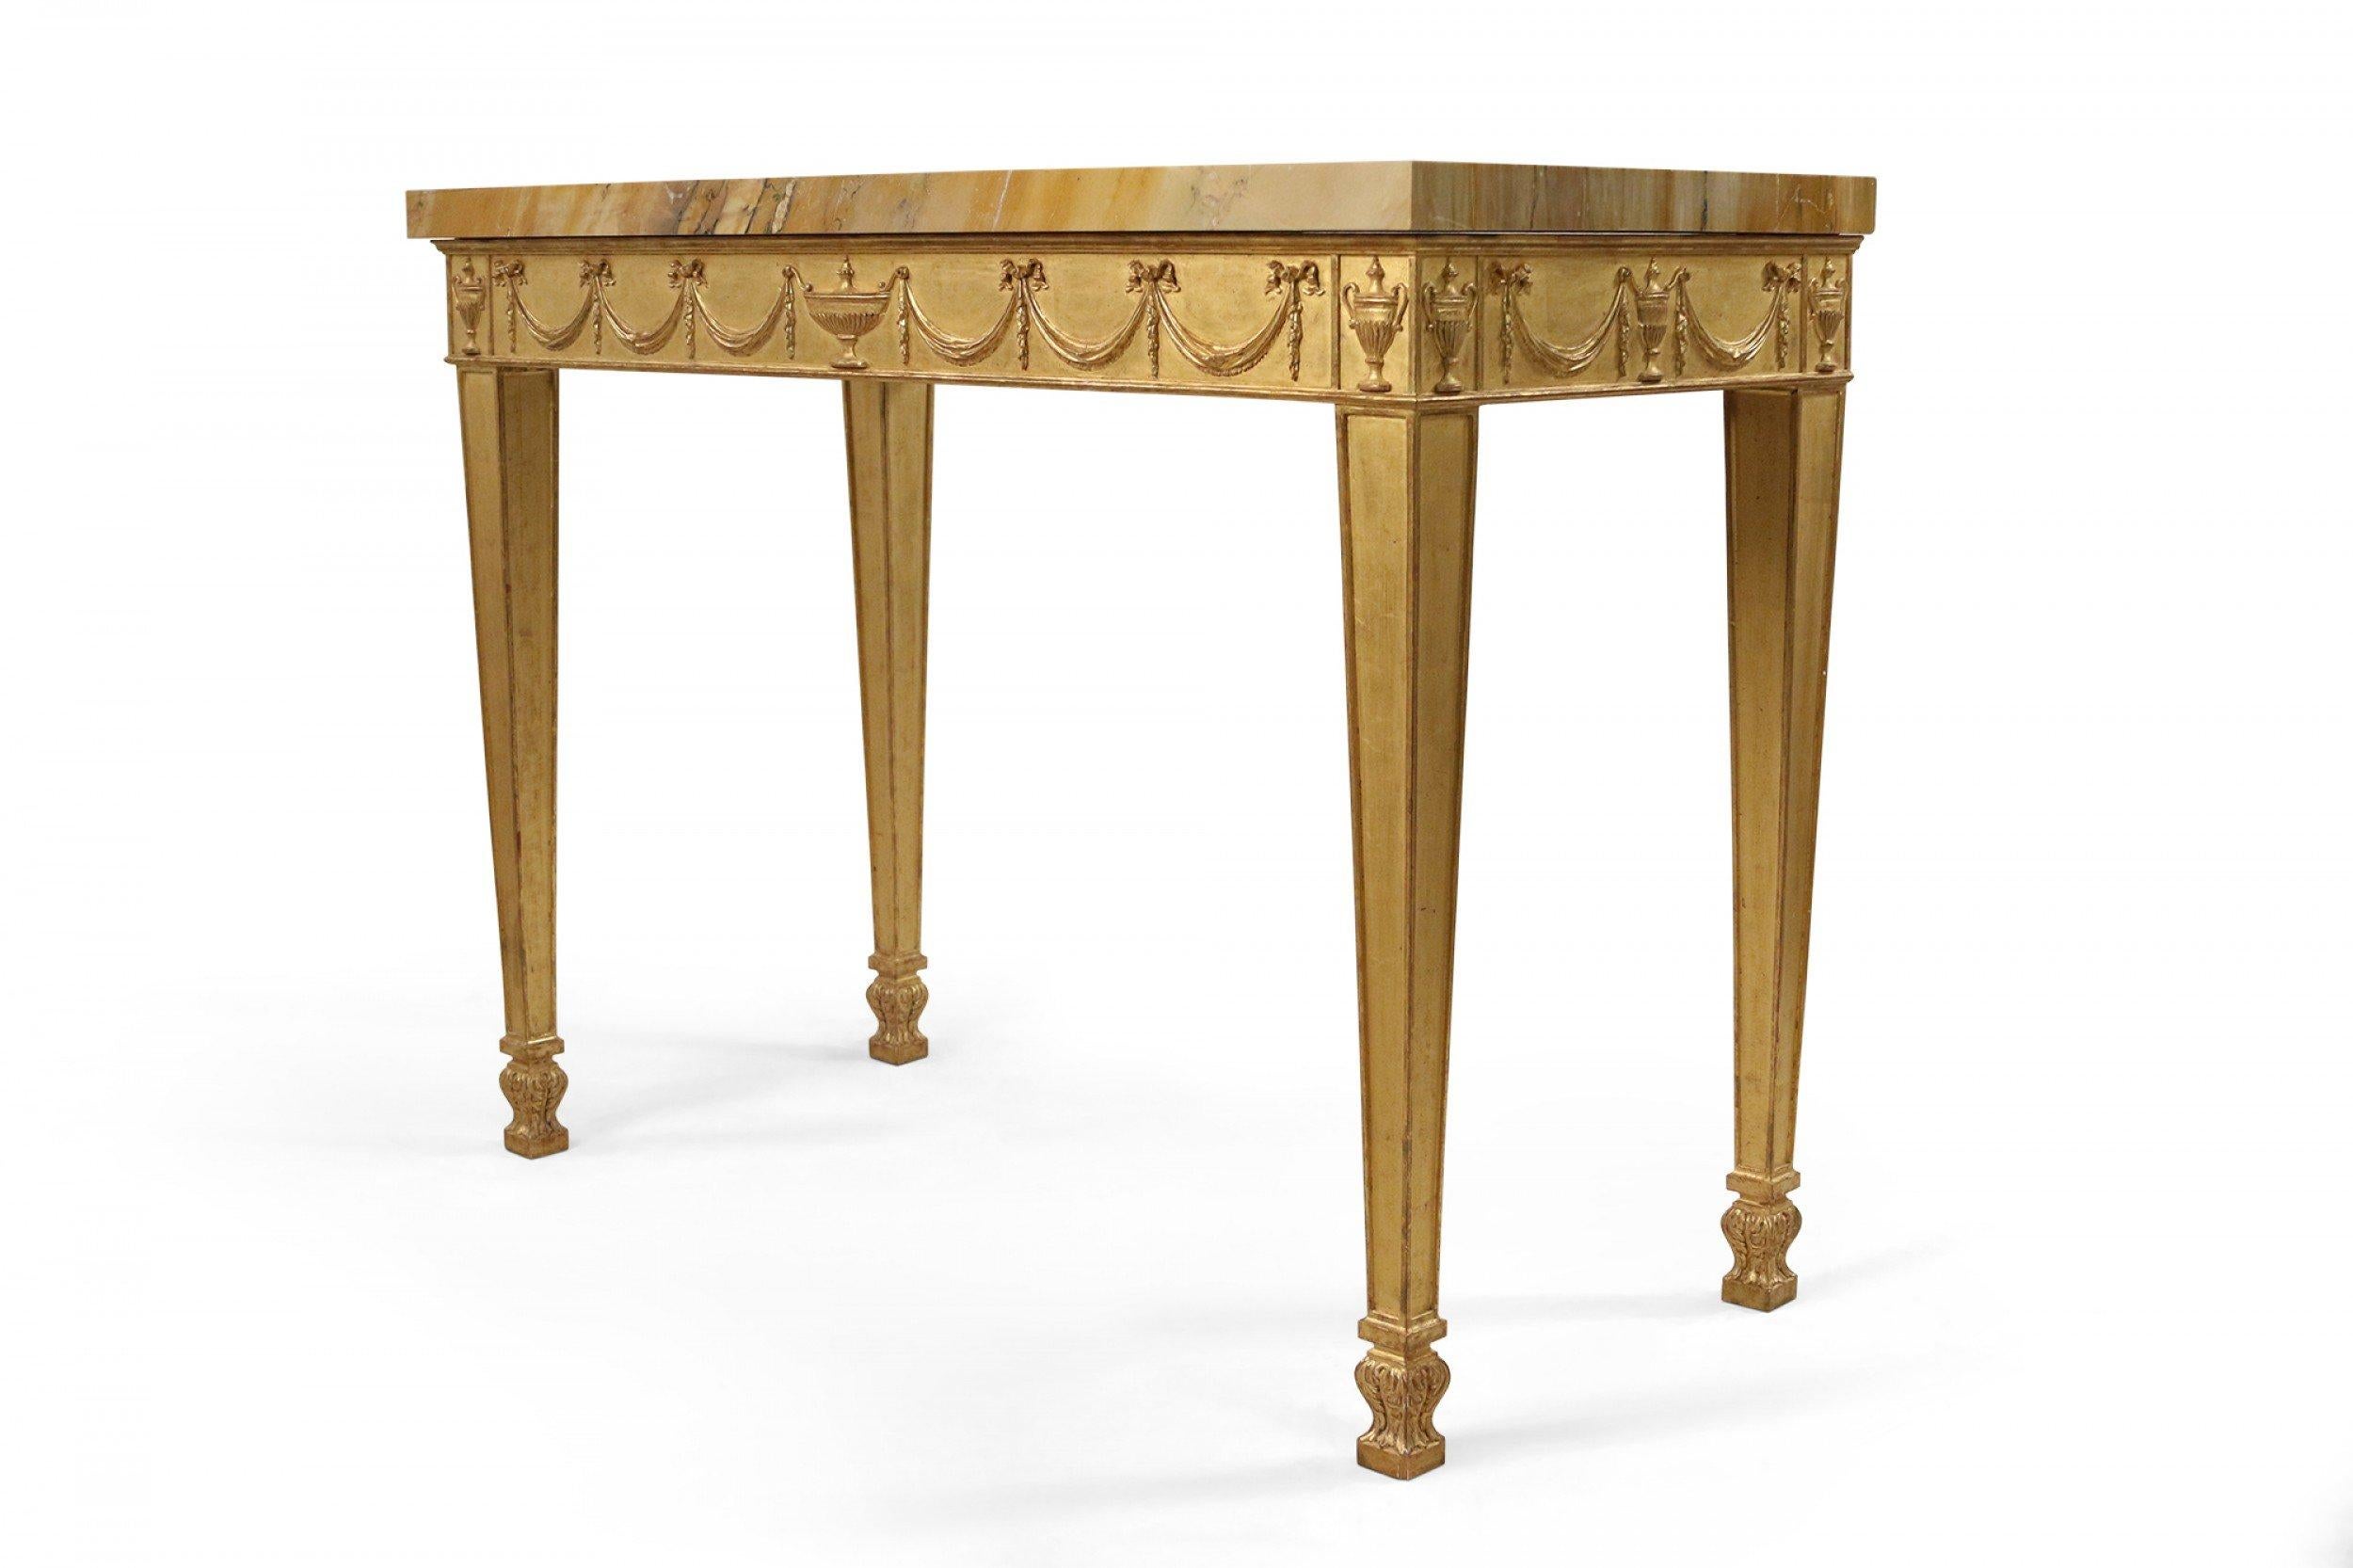 Pair of English Adam neoclassic style 19th century carved giltwood console tables with carved urn and swag relief design on apron supported on square tapered legs over Sienna yellow marble tops.